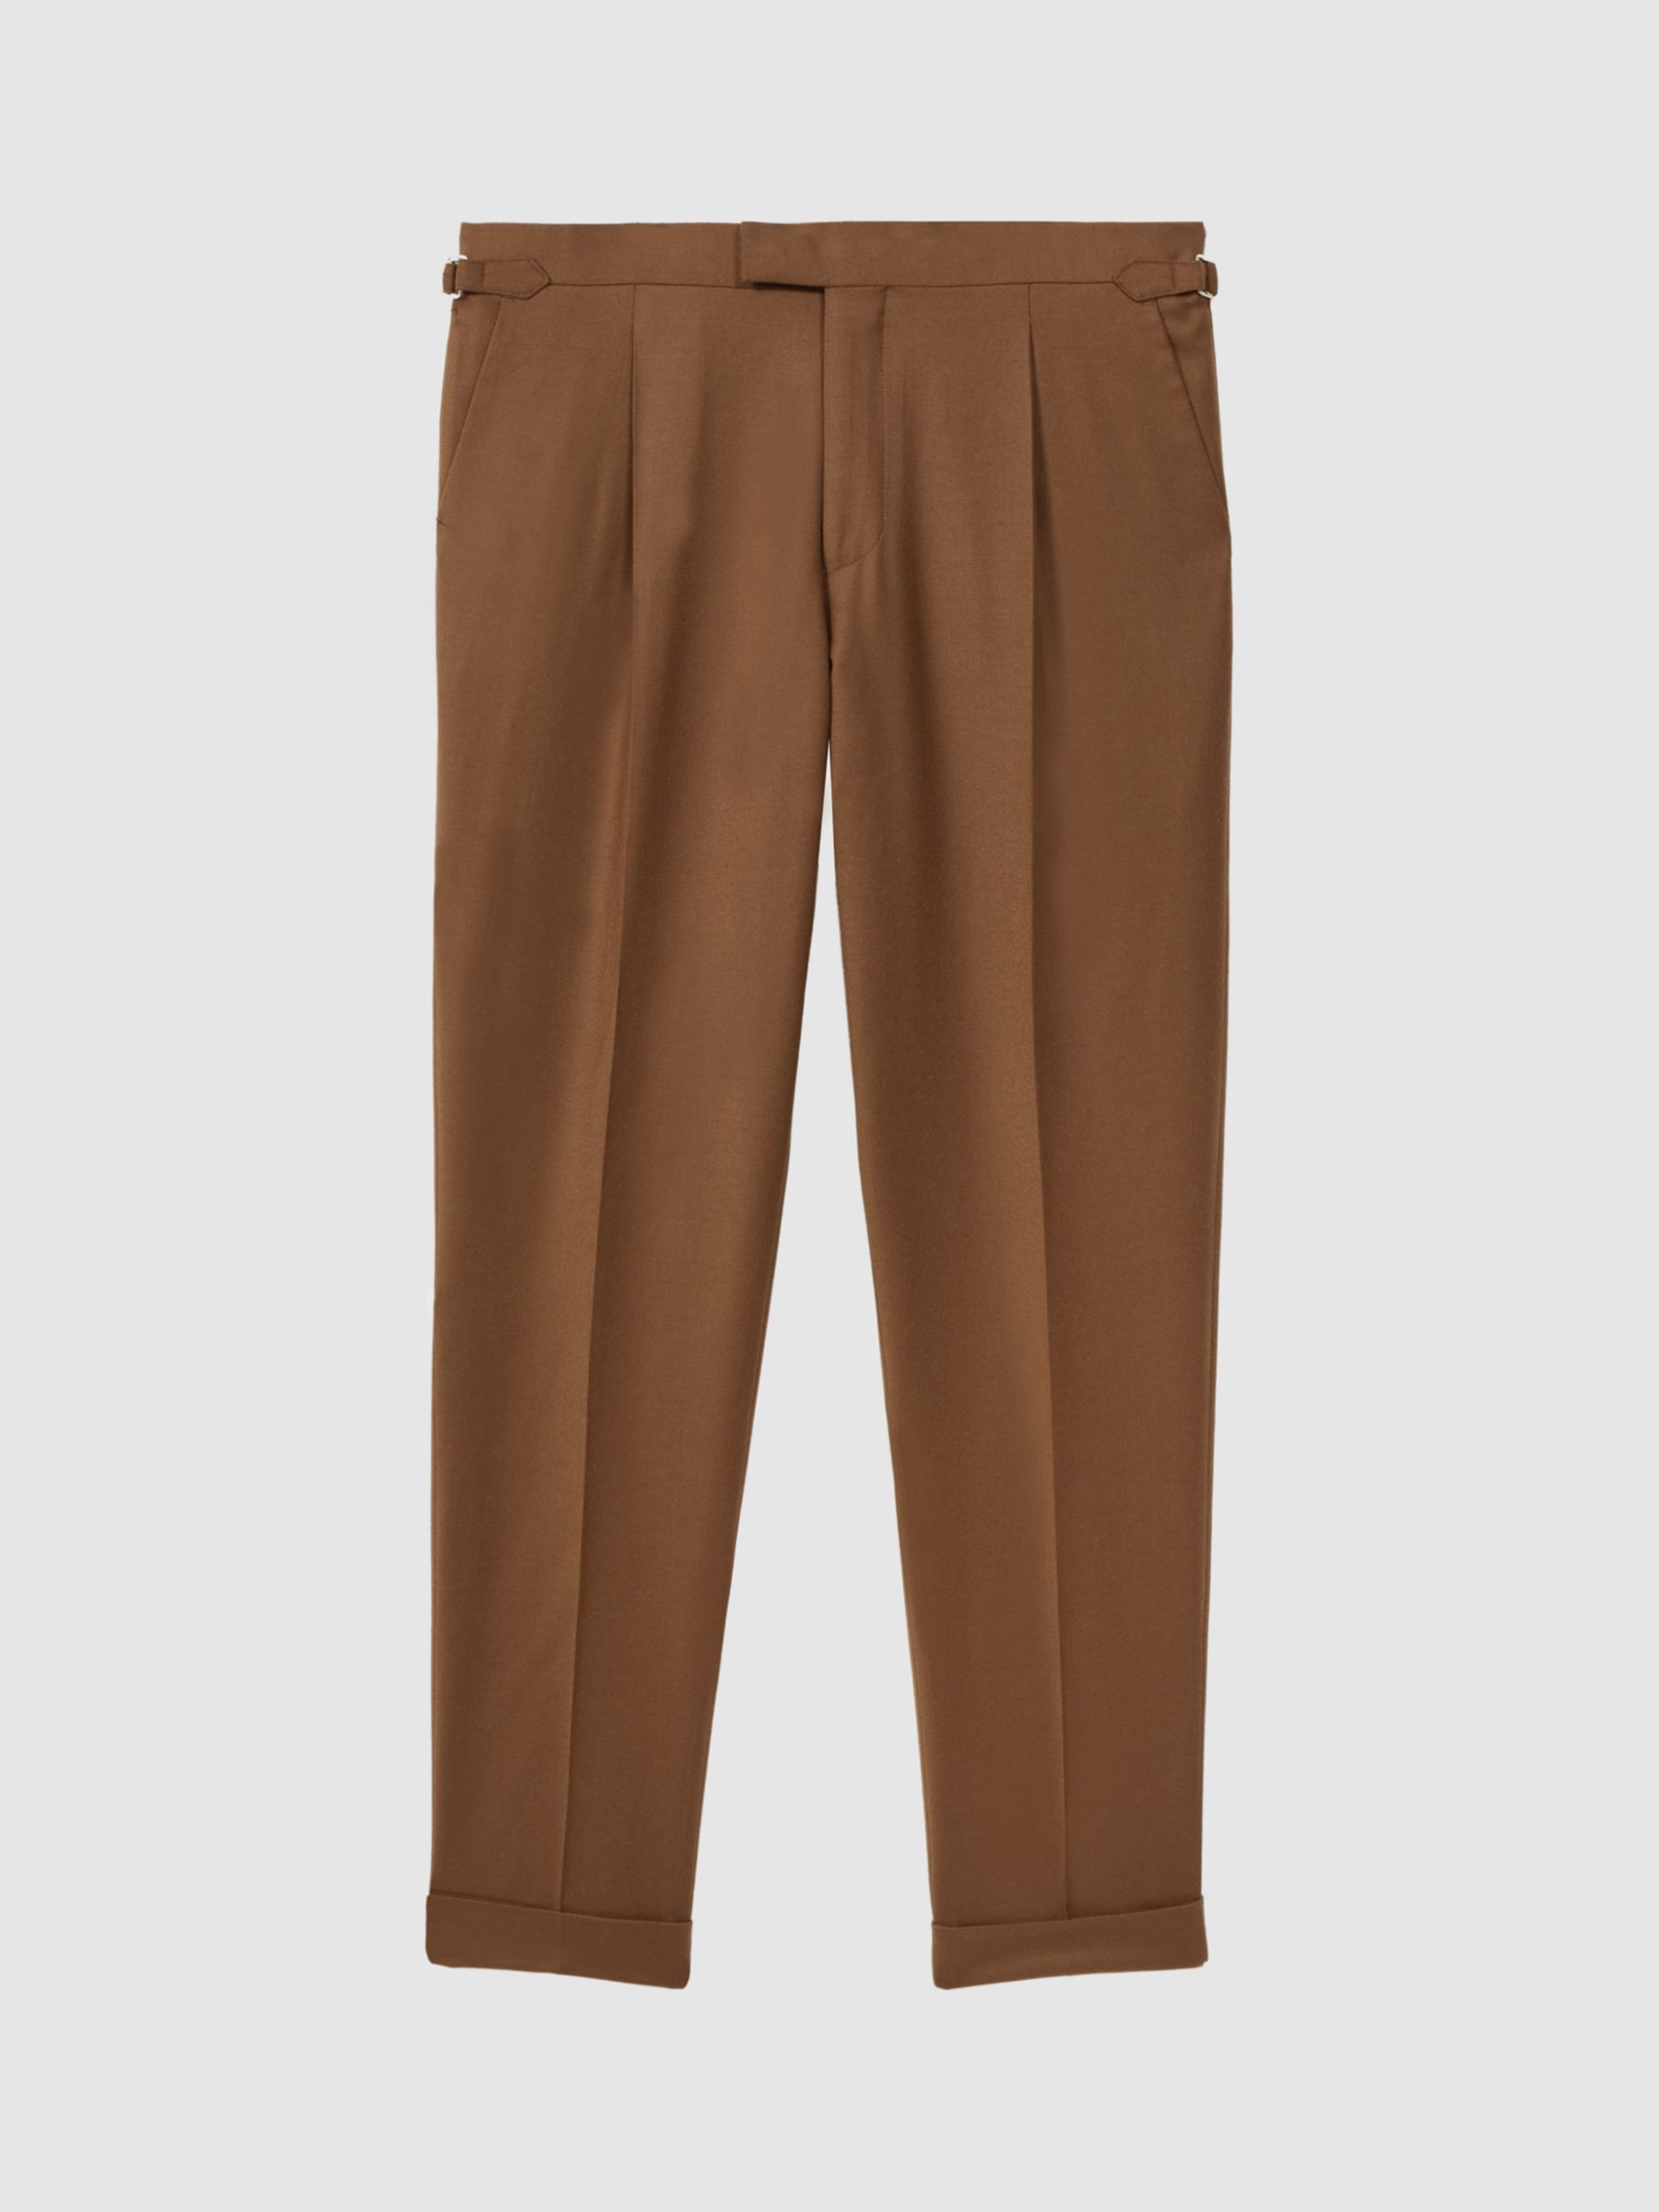 Reiss Venue Flannel Wool Blend Suit Trousers, Tobacco at John Lewis ...